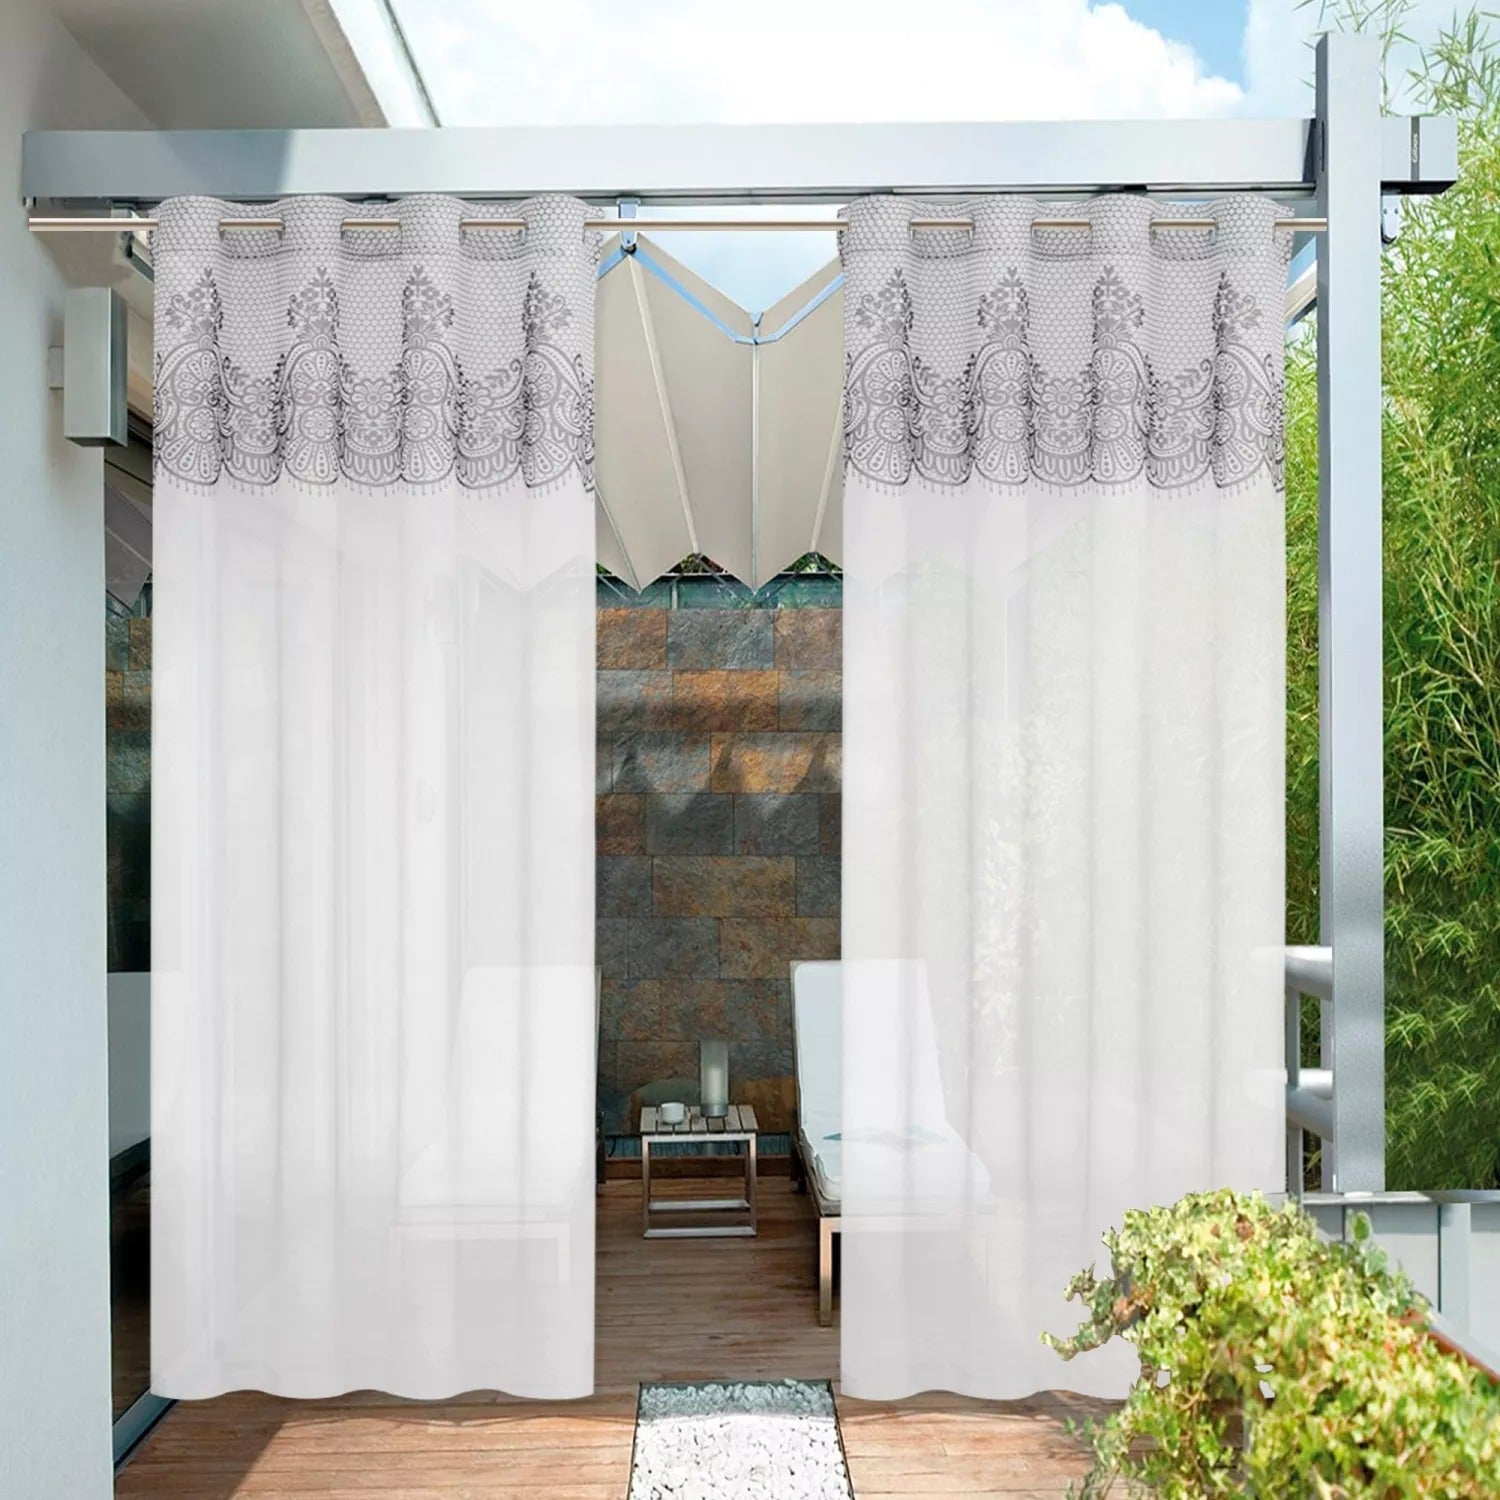 Lace Pattern Print Grommet Privacy Decorative Outdoor Sheer Curtains For Patio, Gazebo, Pergola 1 Panel KGORGE Store